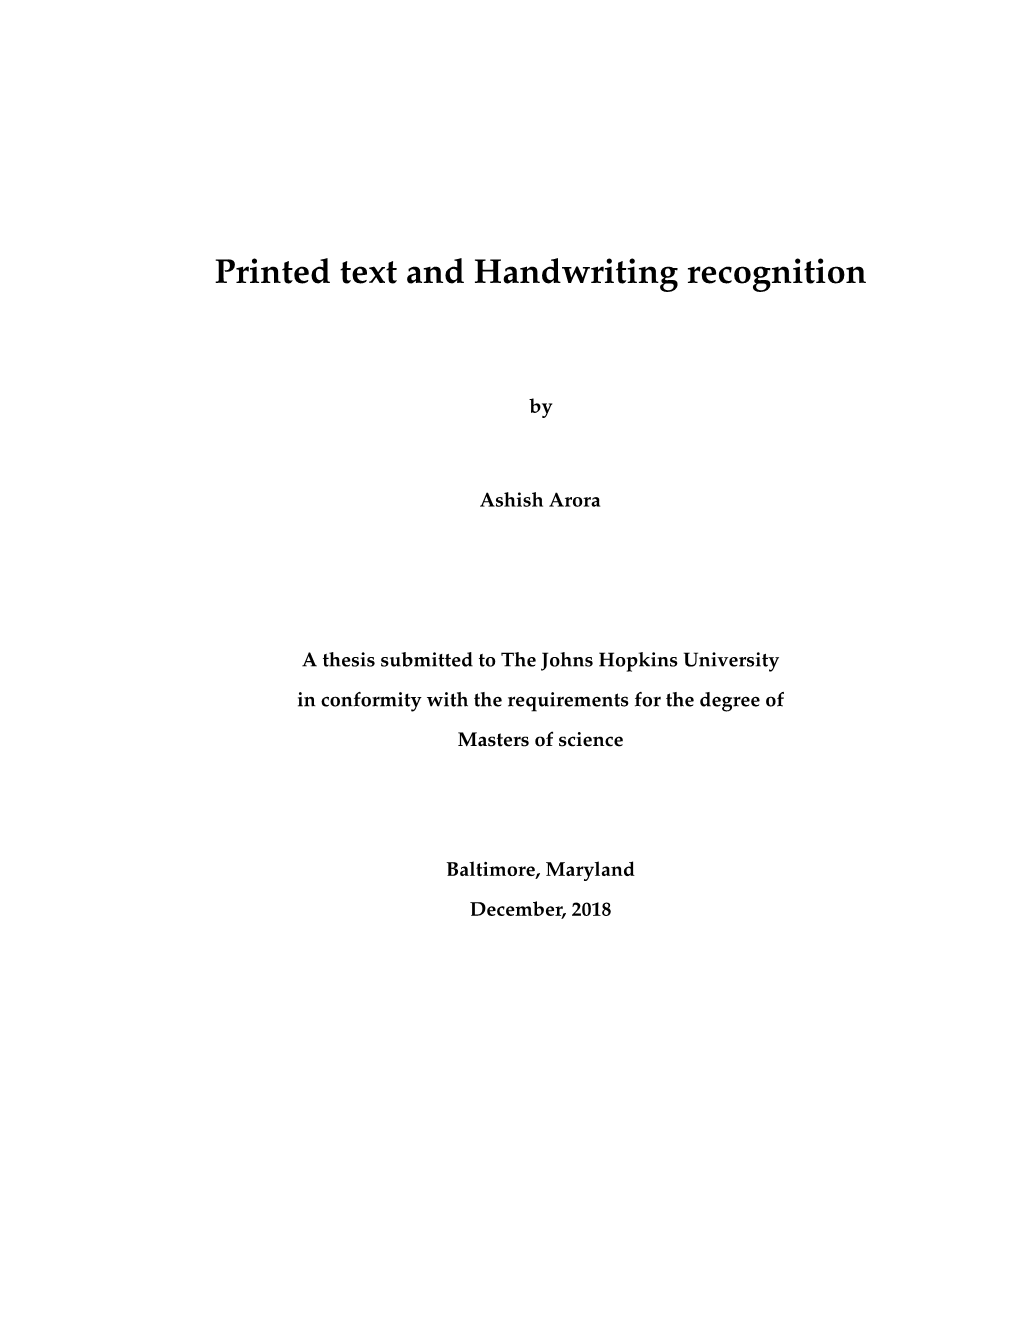 Printed Text and Handwriting Recognition